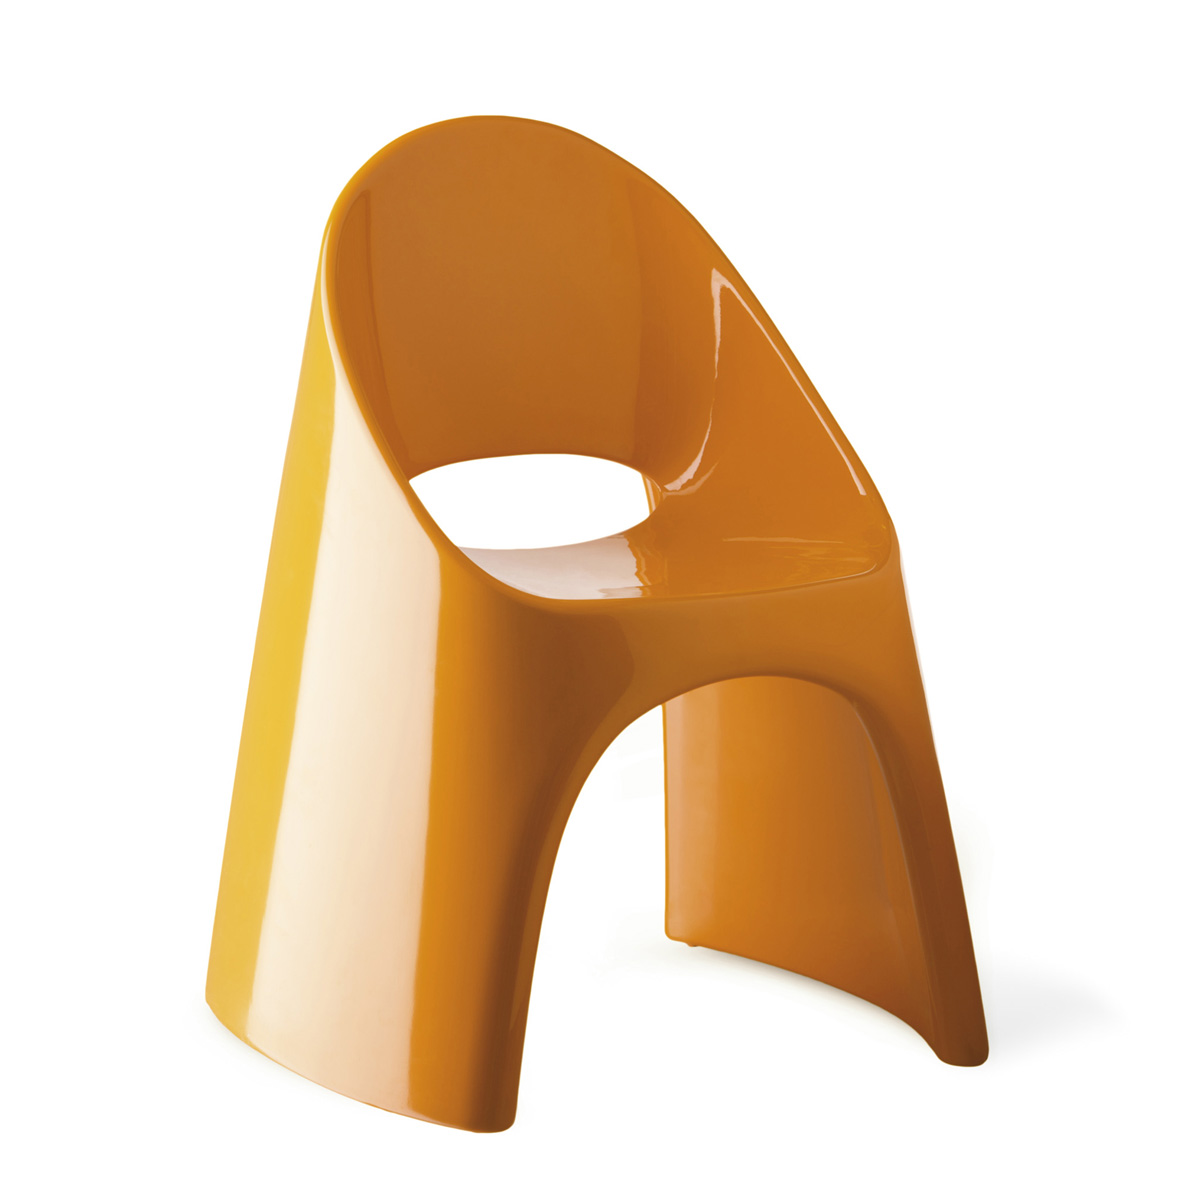 Amelie chair from Slide